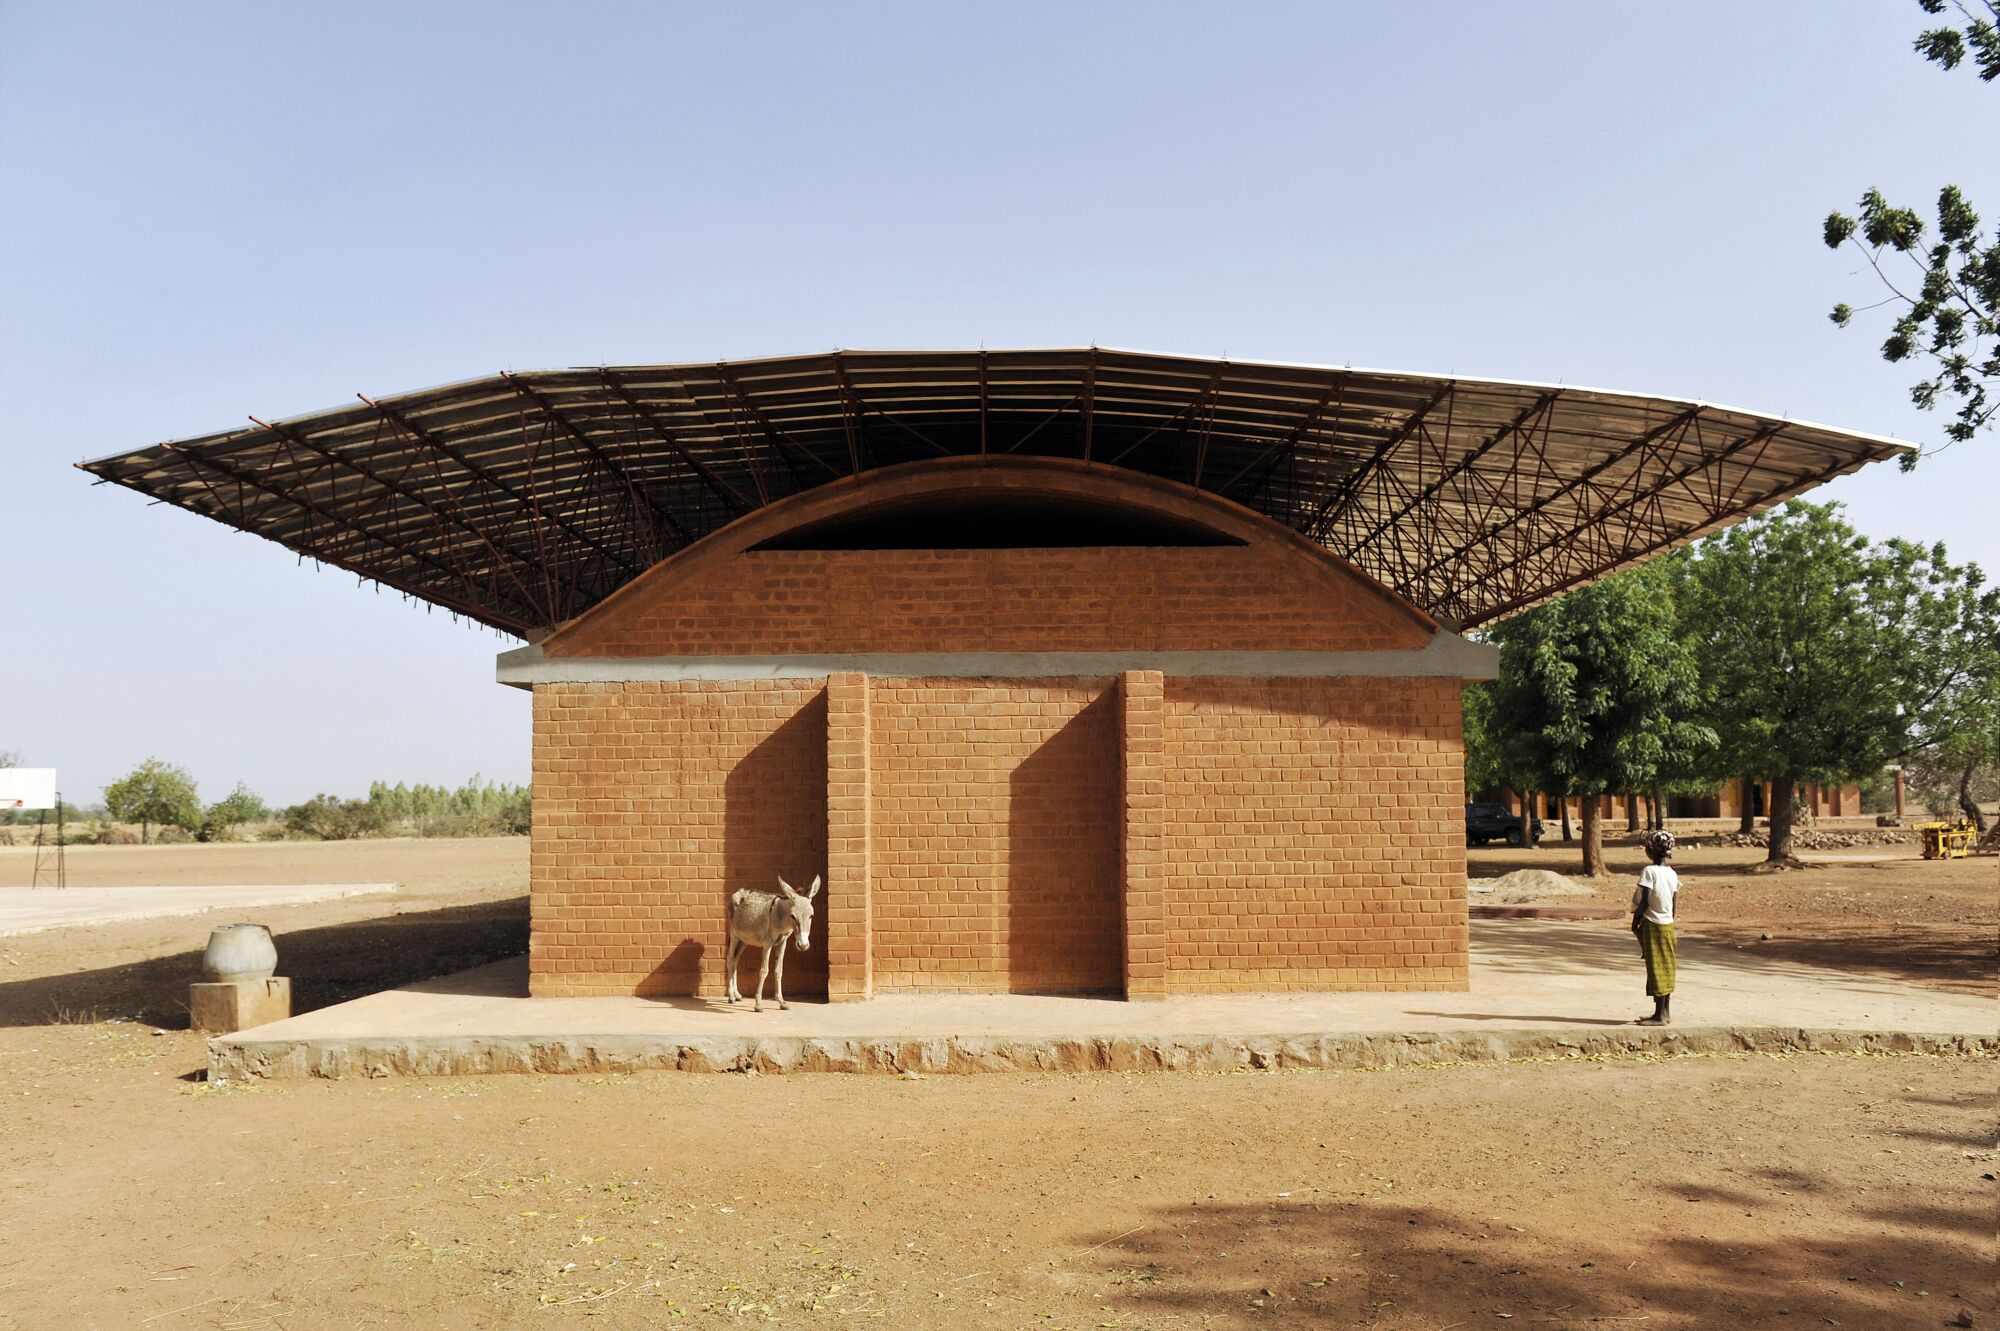 A donkey and a woman stand before a one-story clay brick building that is sheltered by a floating roof.